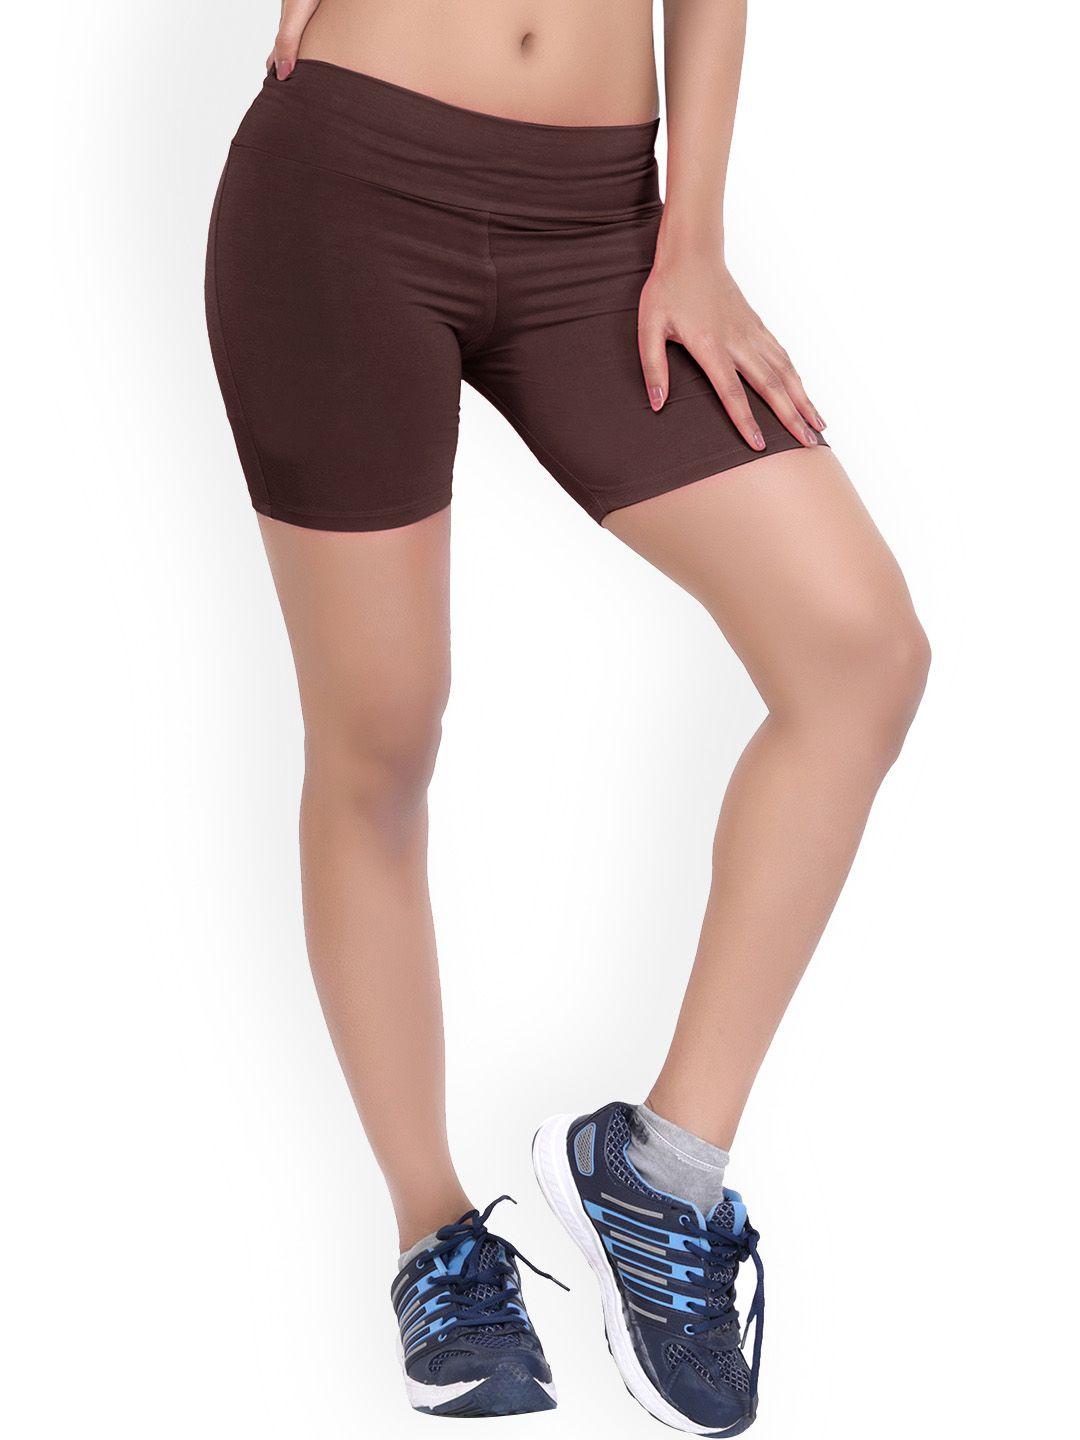 laasa-sports-women-brown-skinny-fit-high-rise-rapid-dry-training-or-gym-sports-shorts